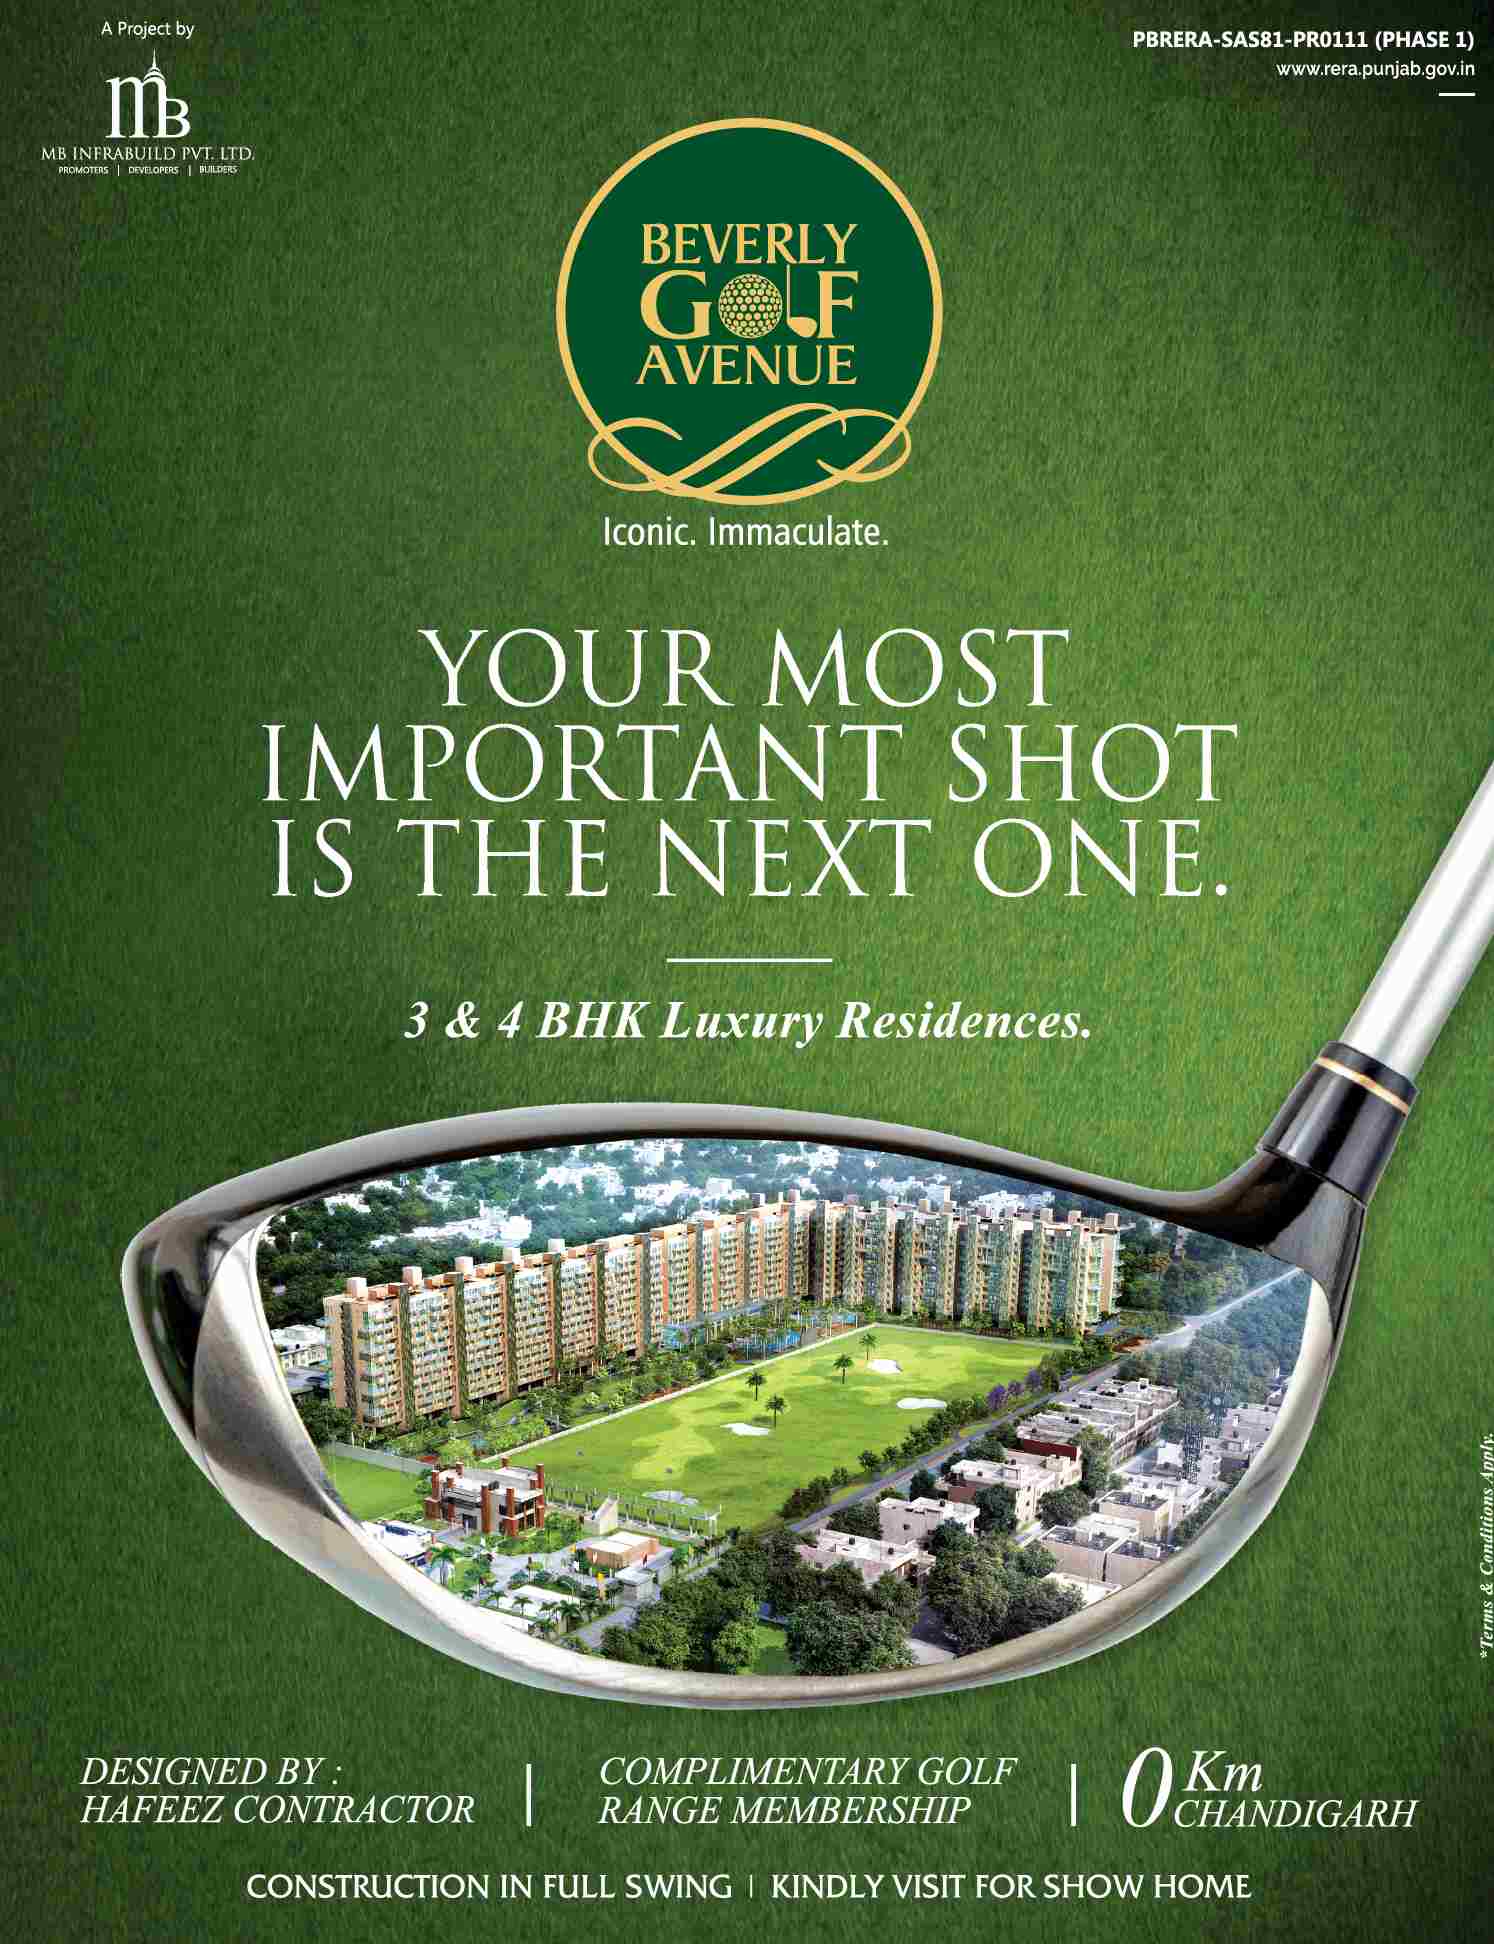 Construction in full swing at MB Beverly Golf Avenue in Sector 65, Mohali